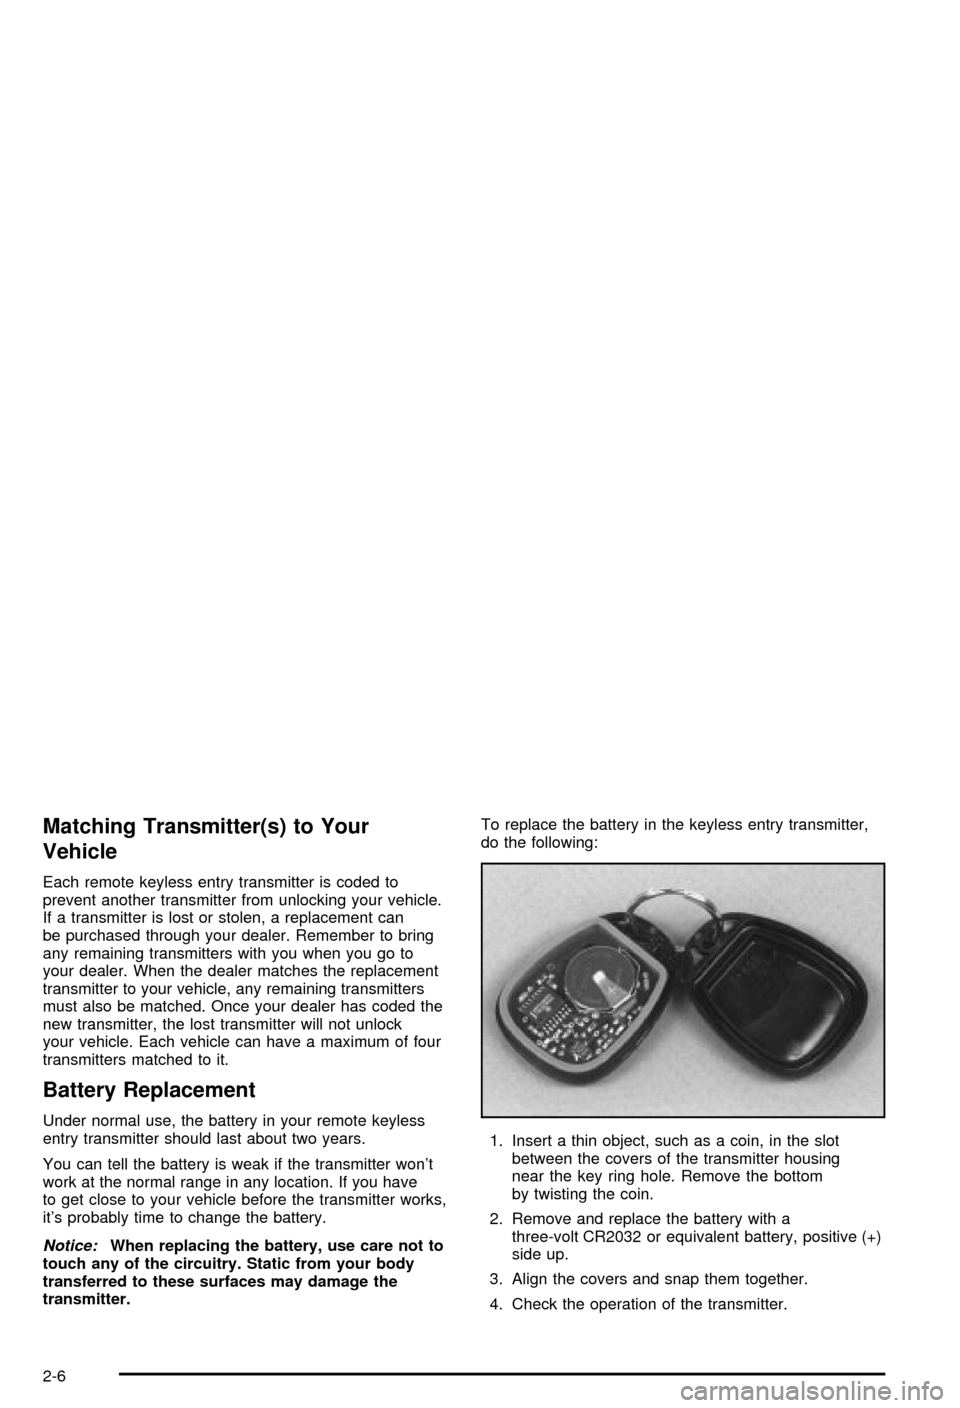 CHEVROLET AVALANCHE 2003 1.G Manual PDF Matching Transmitter(s) to Your
Vehicle
Each remote keyless entry transmitter is coded to
prevent another transmitter from unlocking your vehicle.
If a transmitter is lost or stolen, a replacement can